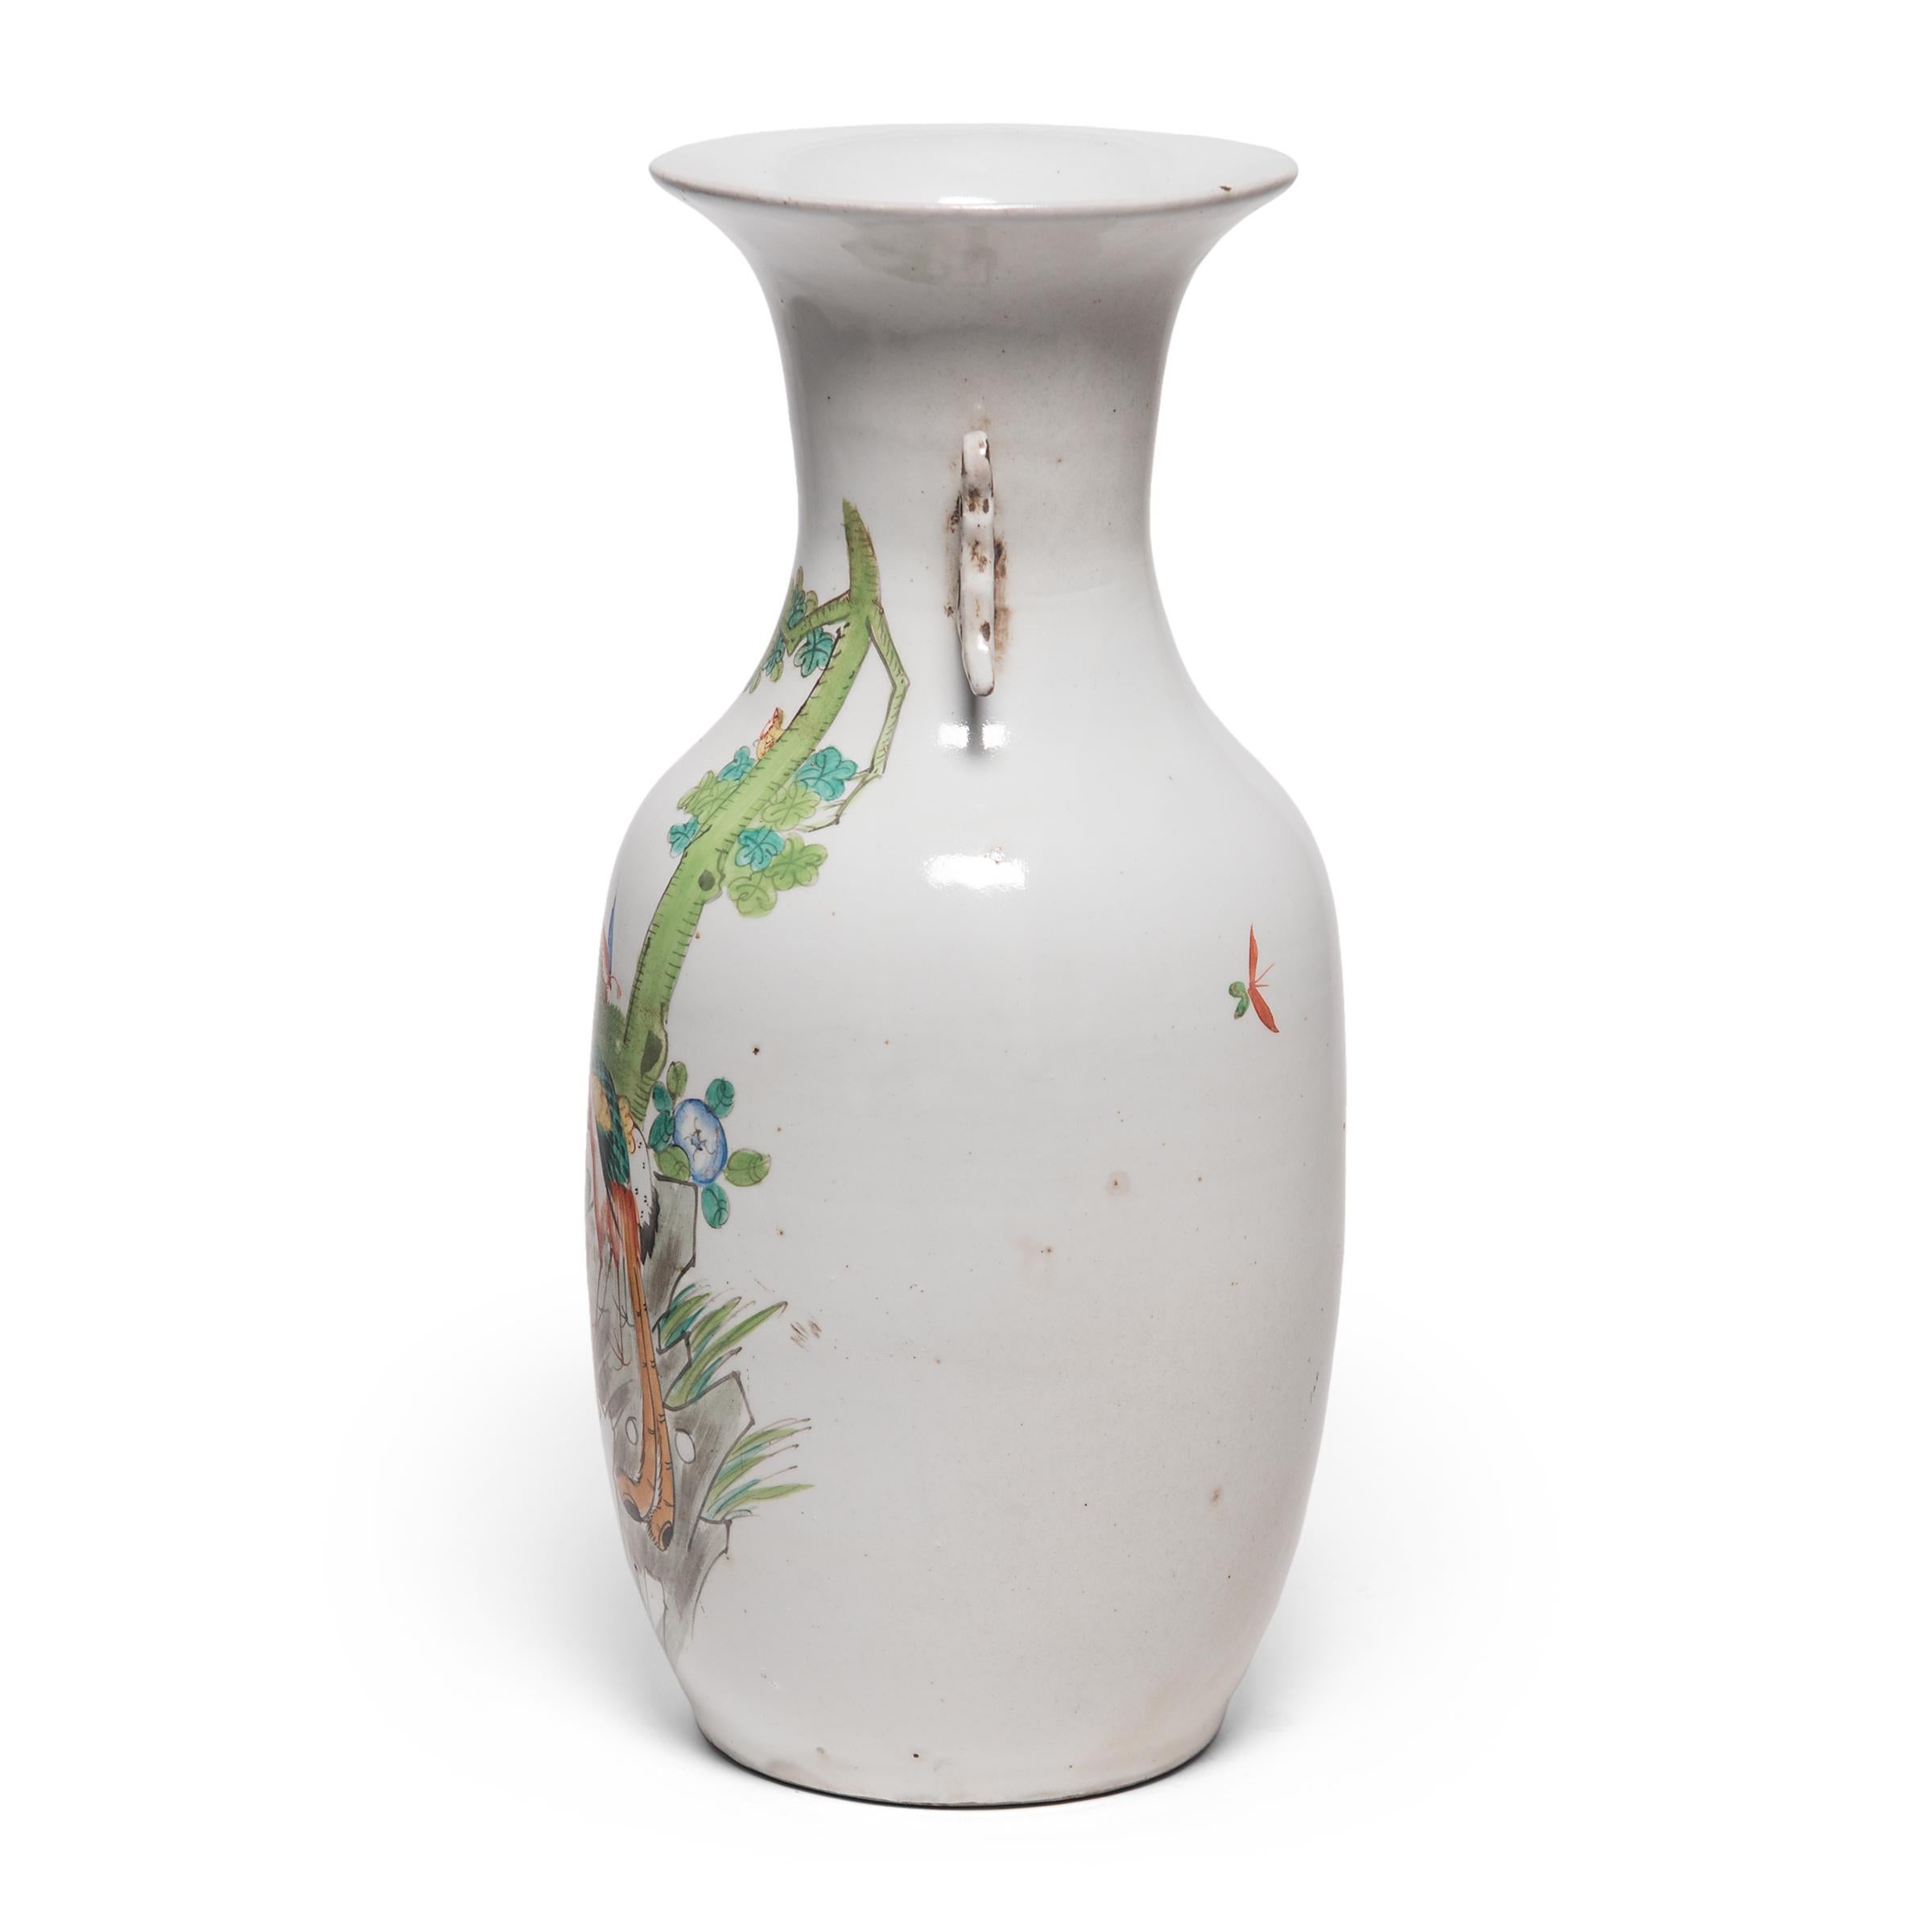 The phoenix tail vase form dates back as far as the bronze age and has remained a popular shape for its clean lines and graceful curves. Created in the early 20th century, this particular tall vase depicts a stylized phoenix in a colorful garden